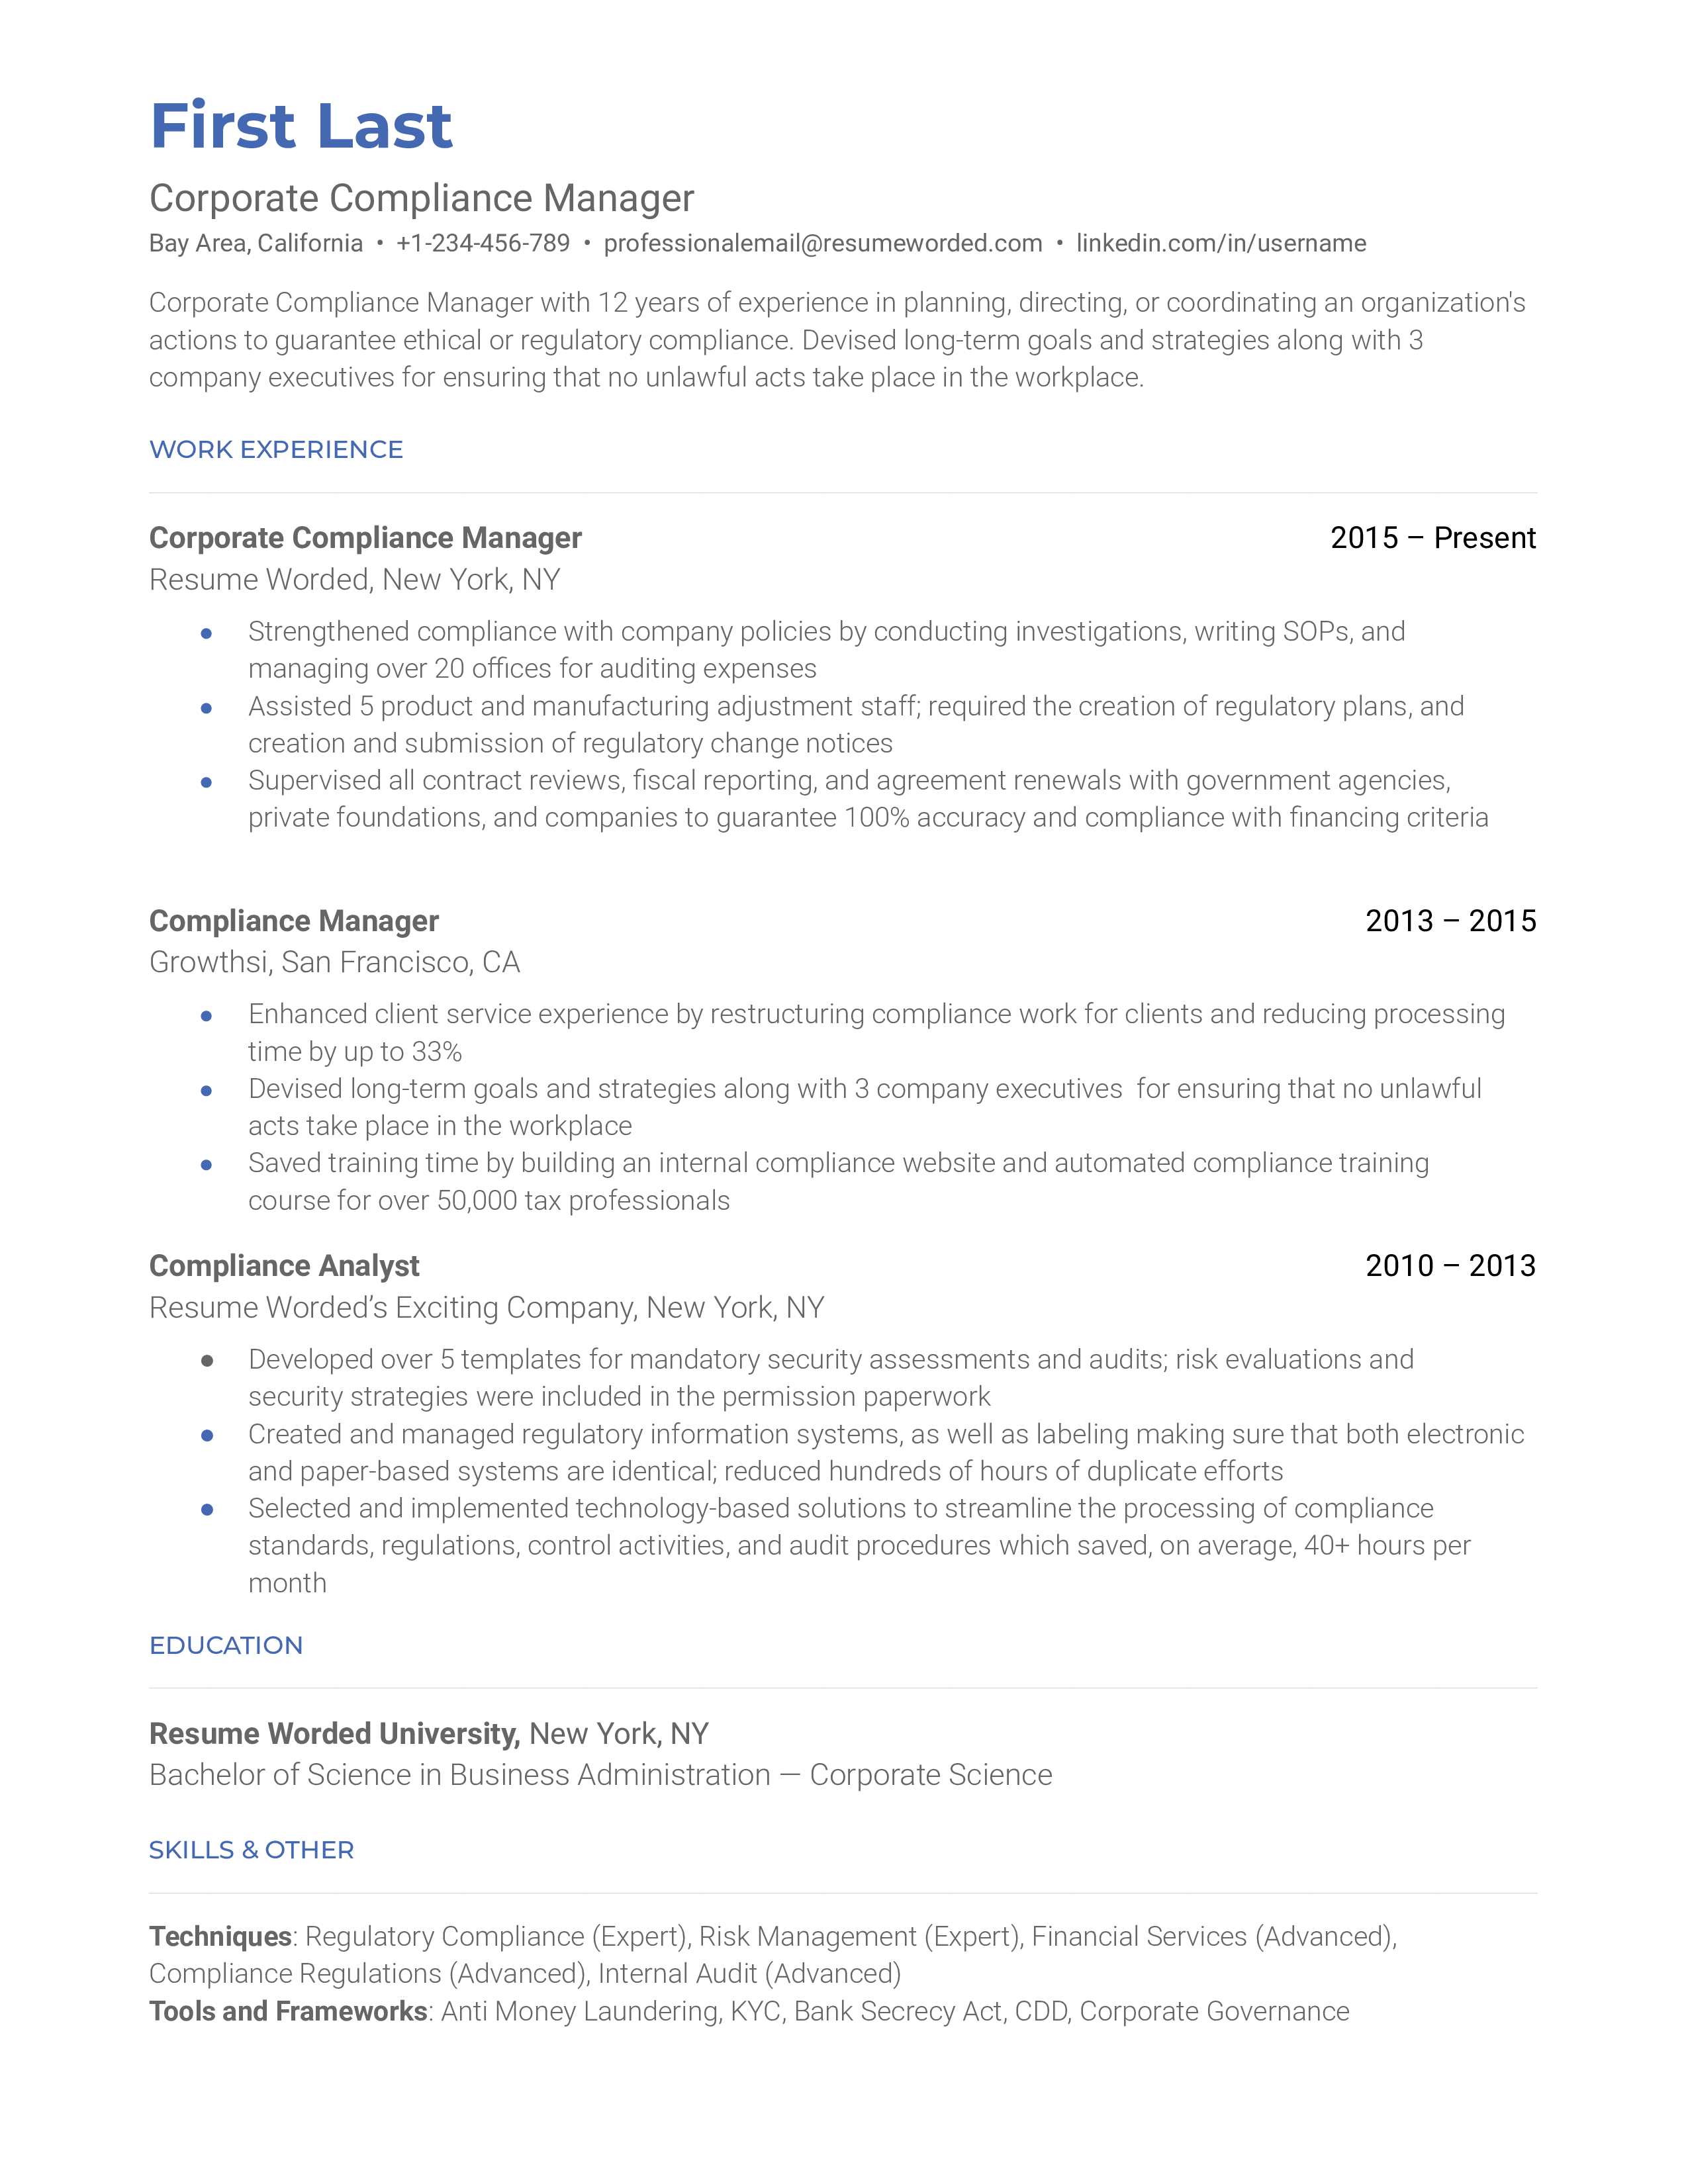 Corporate Compliance Manager Resume Sample